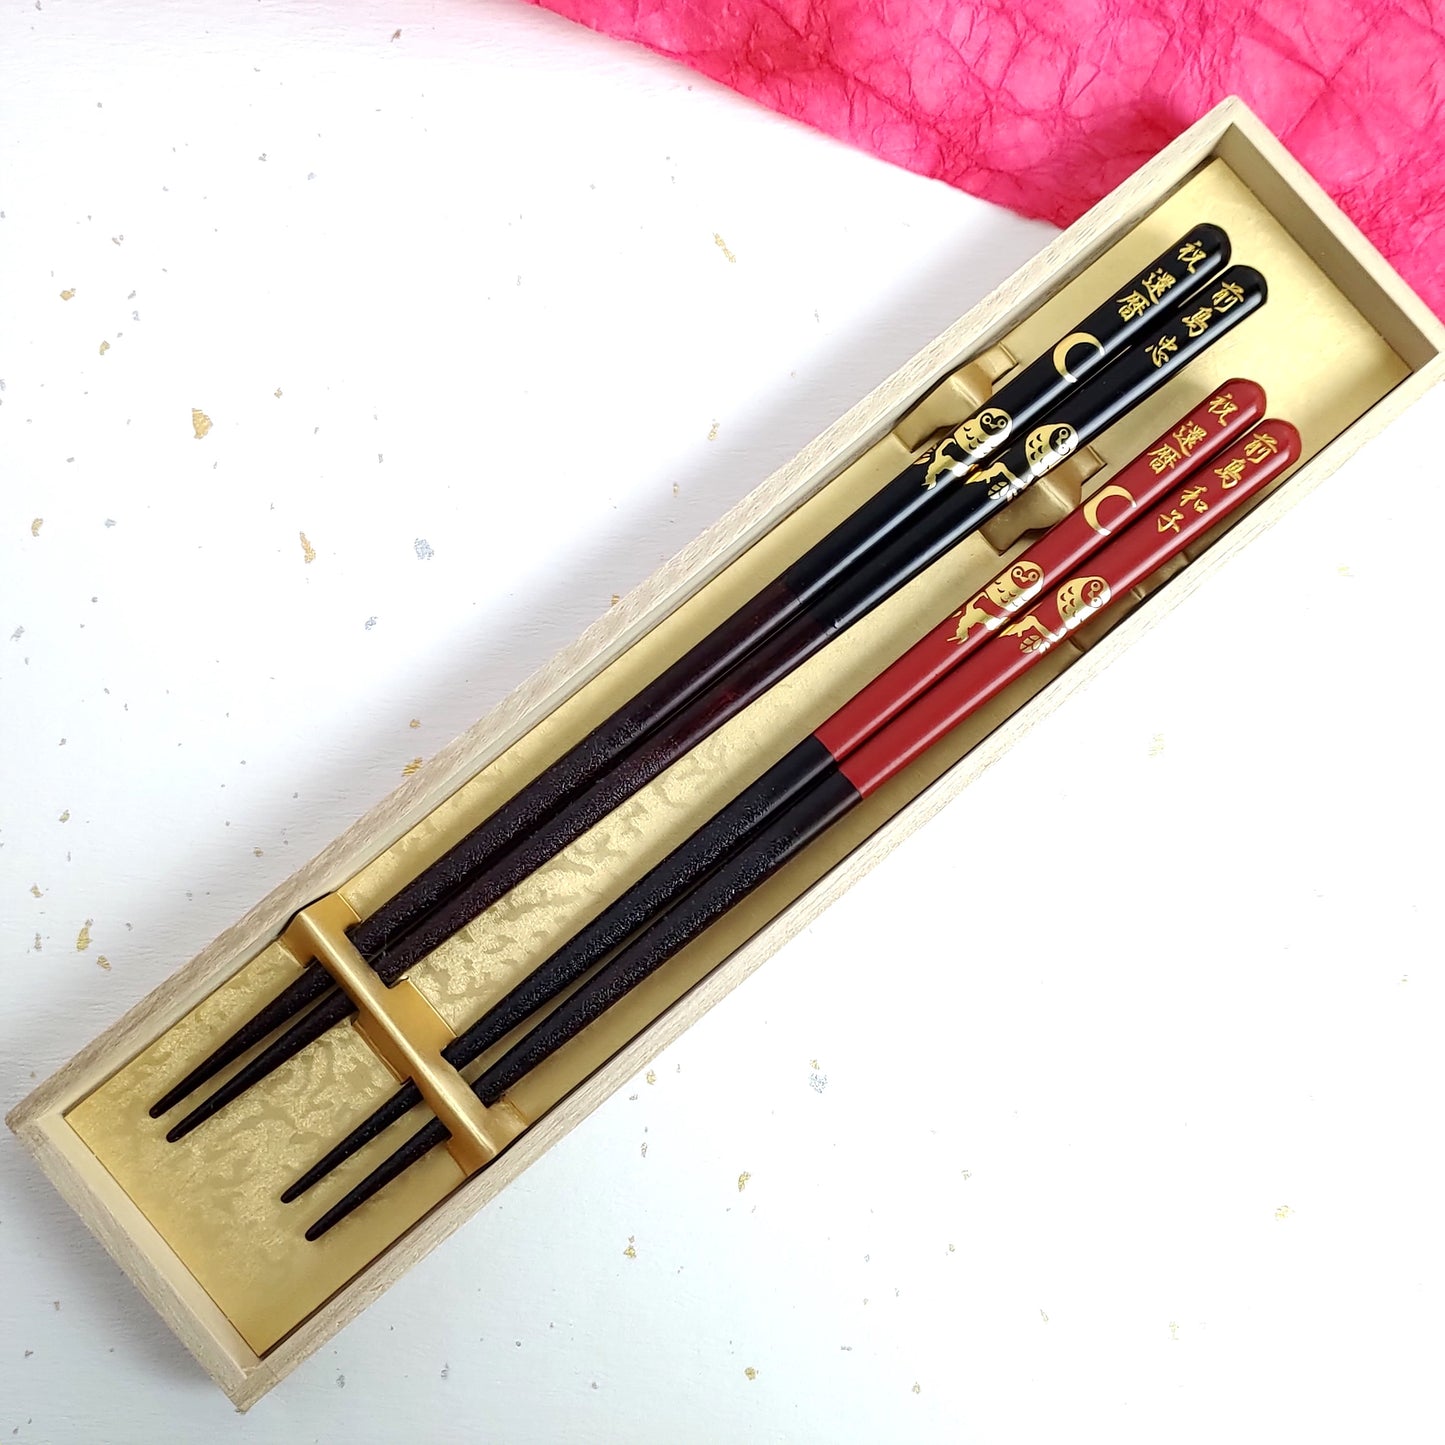 Luxurious Japanese chopsticks with golden owls under the moon design black red - DOUBLE PAIR WITH ENGRAVED WOODEN BOX SET